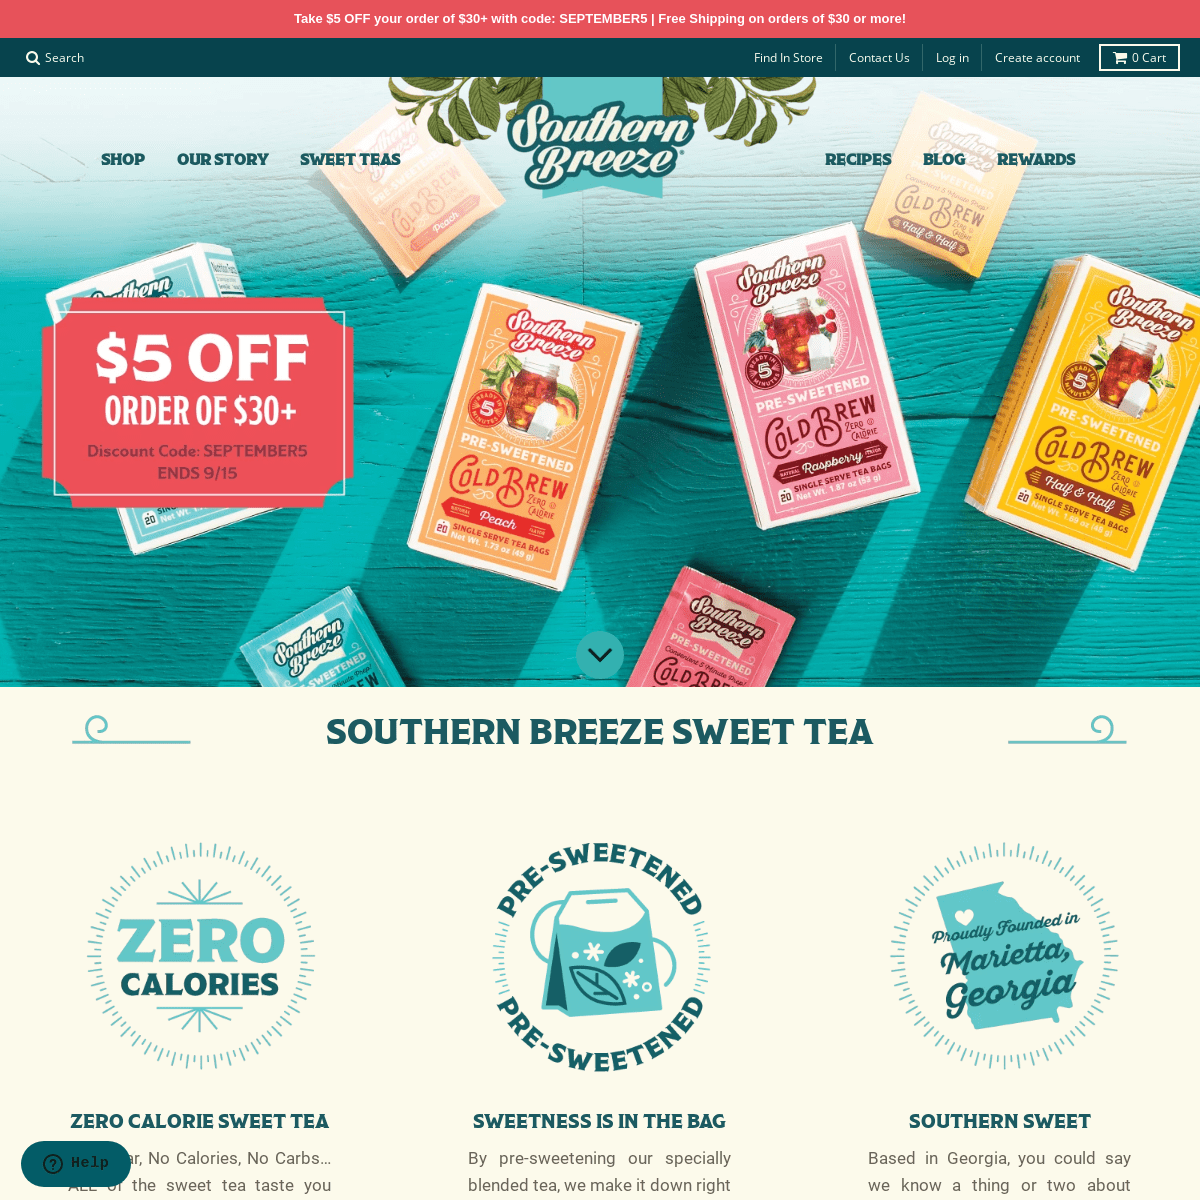 A complete backup of southernbreezesweettea.com